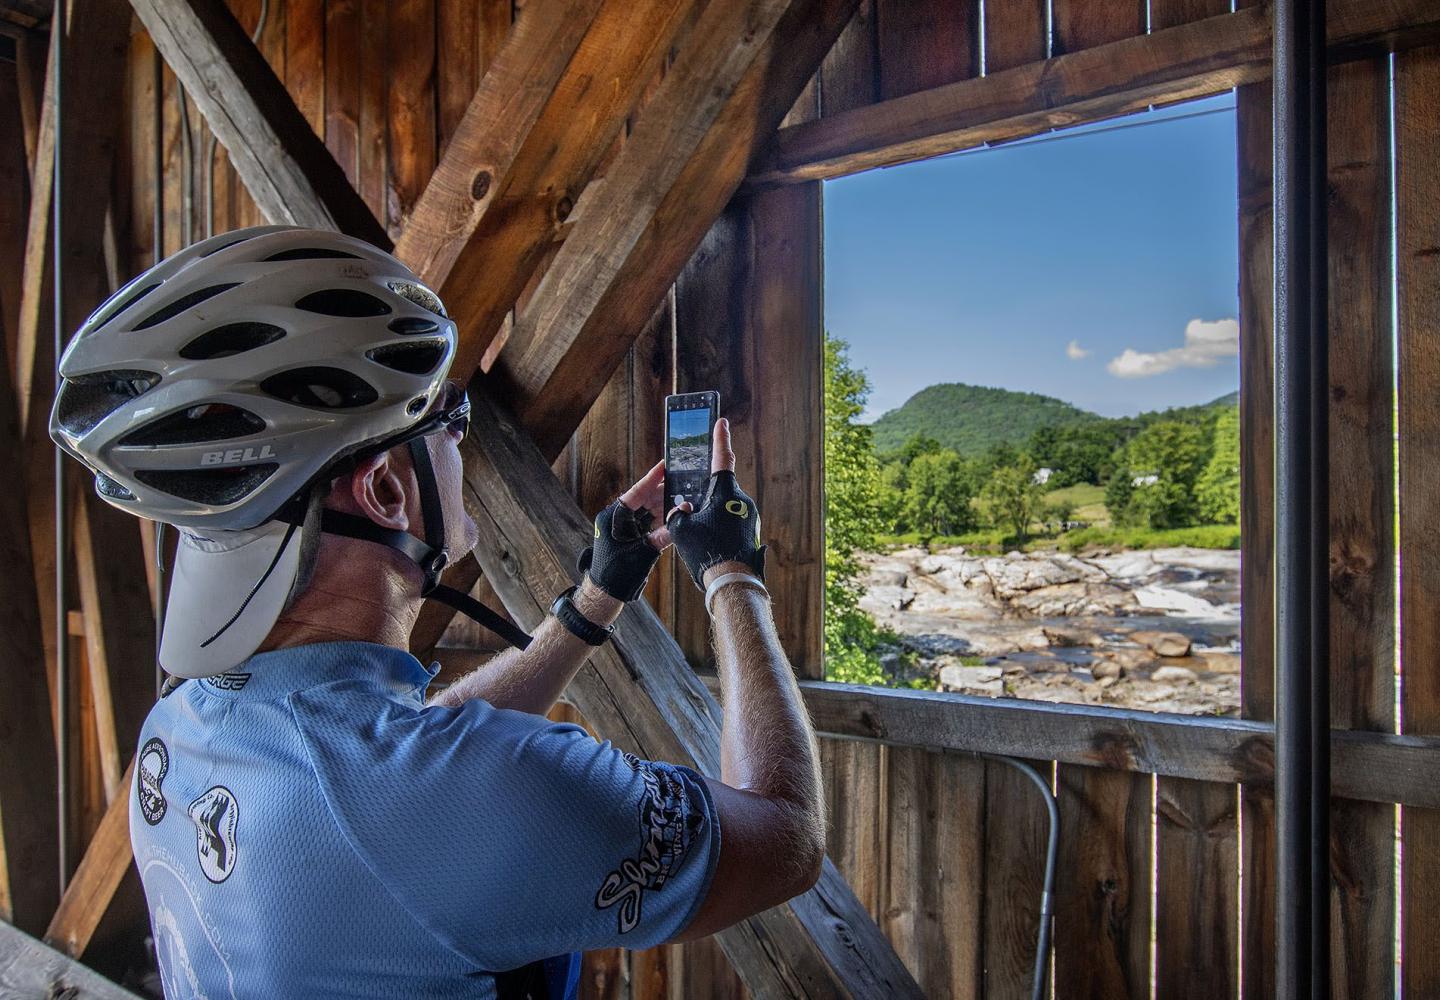 A special feature of Ride for the River is a stop at the historic Jay covered bridge.